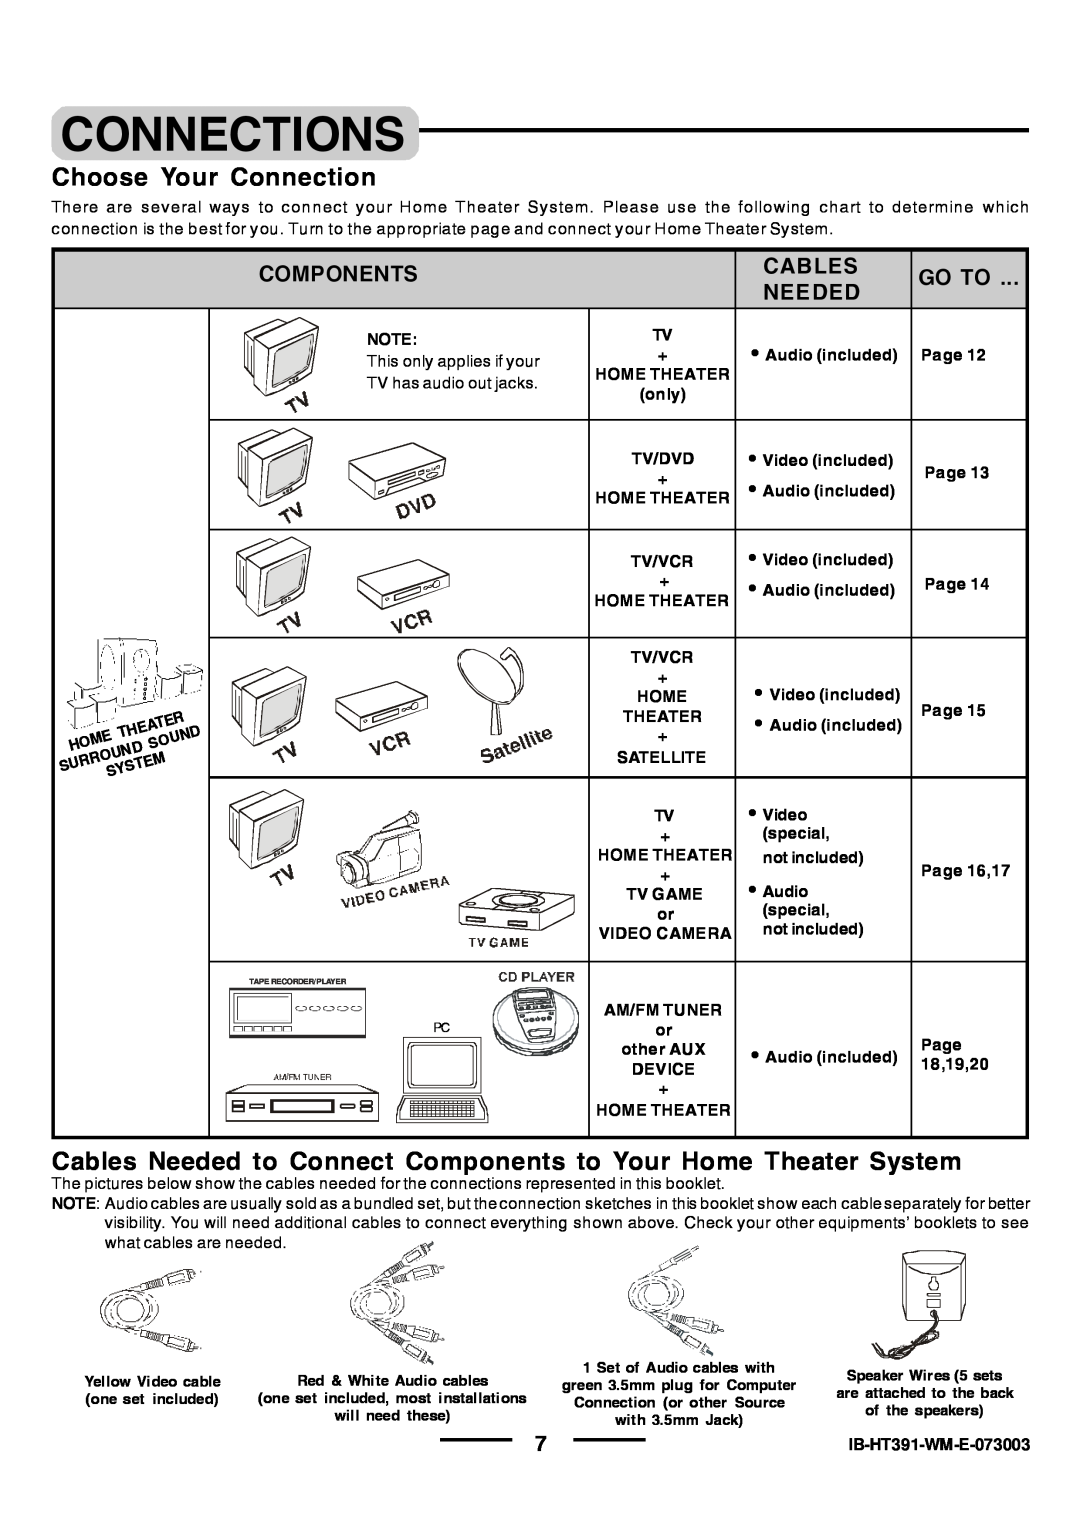 Lenoxx Electronics HT-391 Connections, Choose Your Connection, Audio included Page, Home Theater, only, Tv/Dvd, Tv/Vcr 